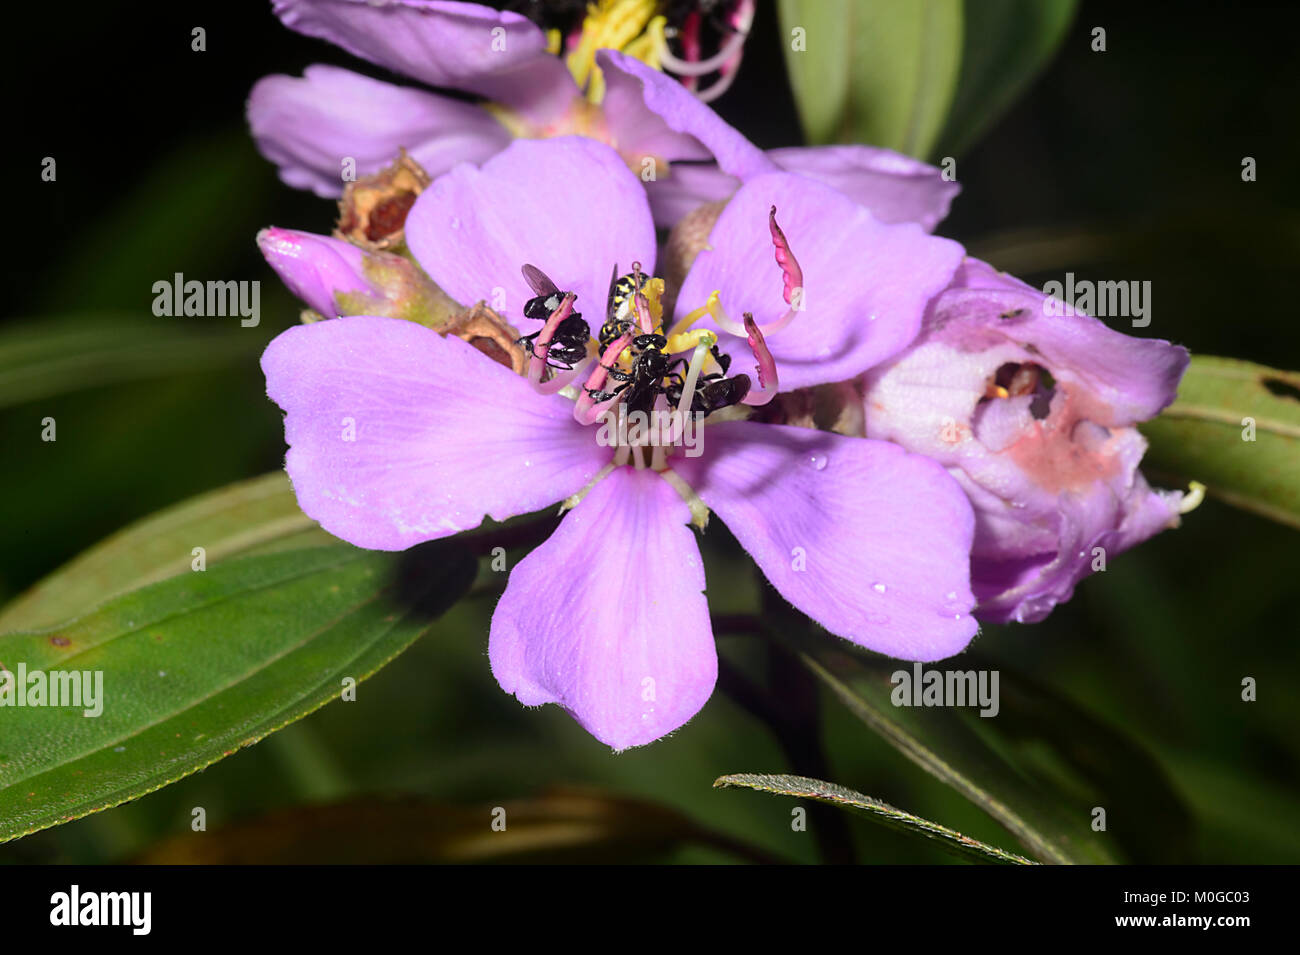 Stingless Bees pollinating a purple flower, Danum Valley Conservation Area, Borneo, Sabah, Malaysia Stock Photo